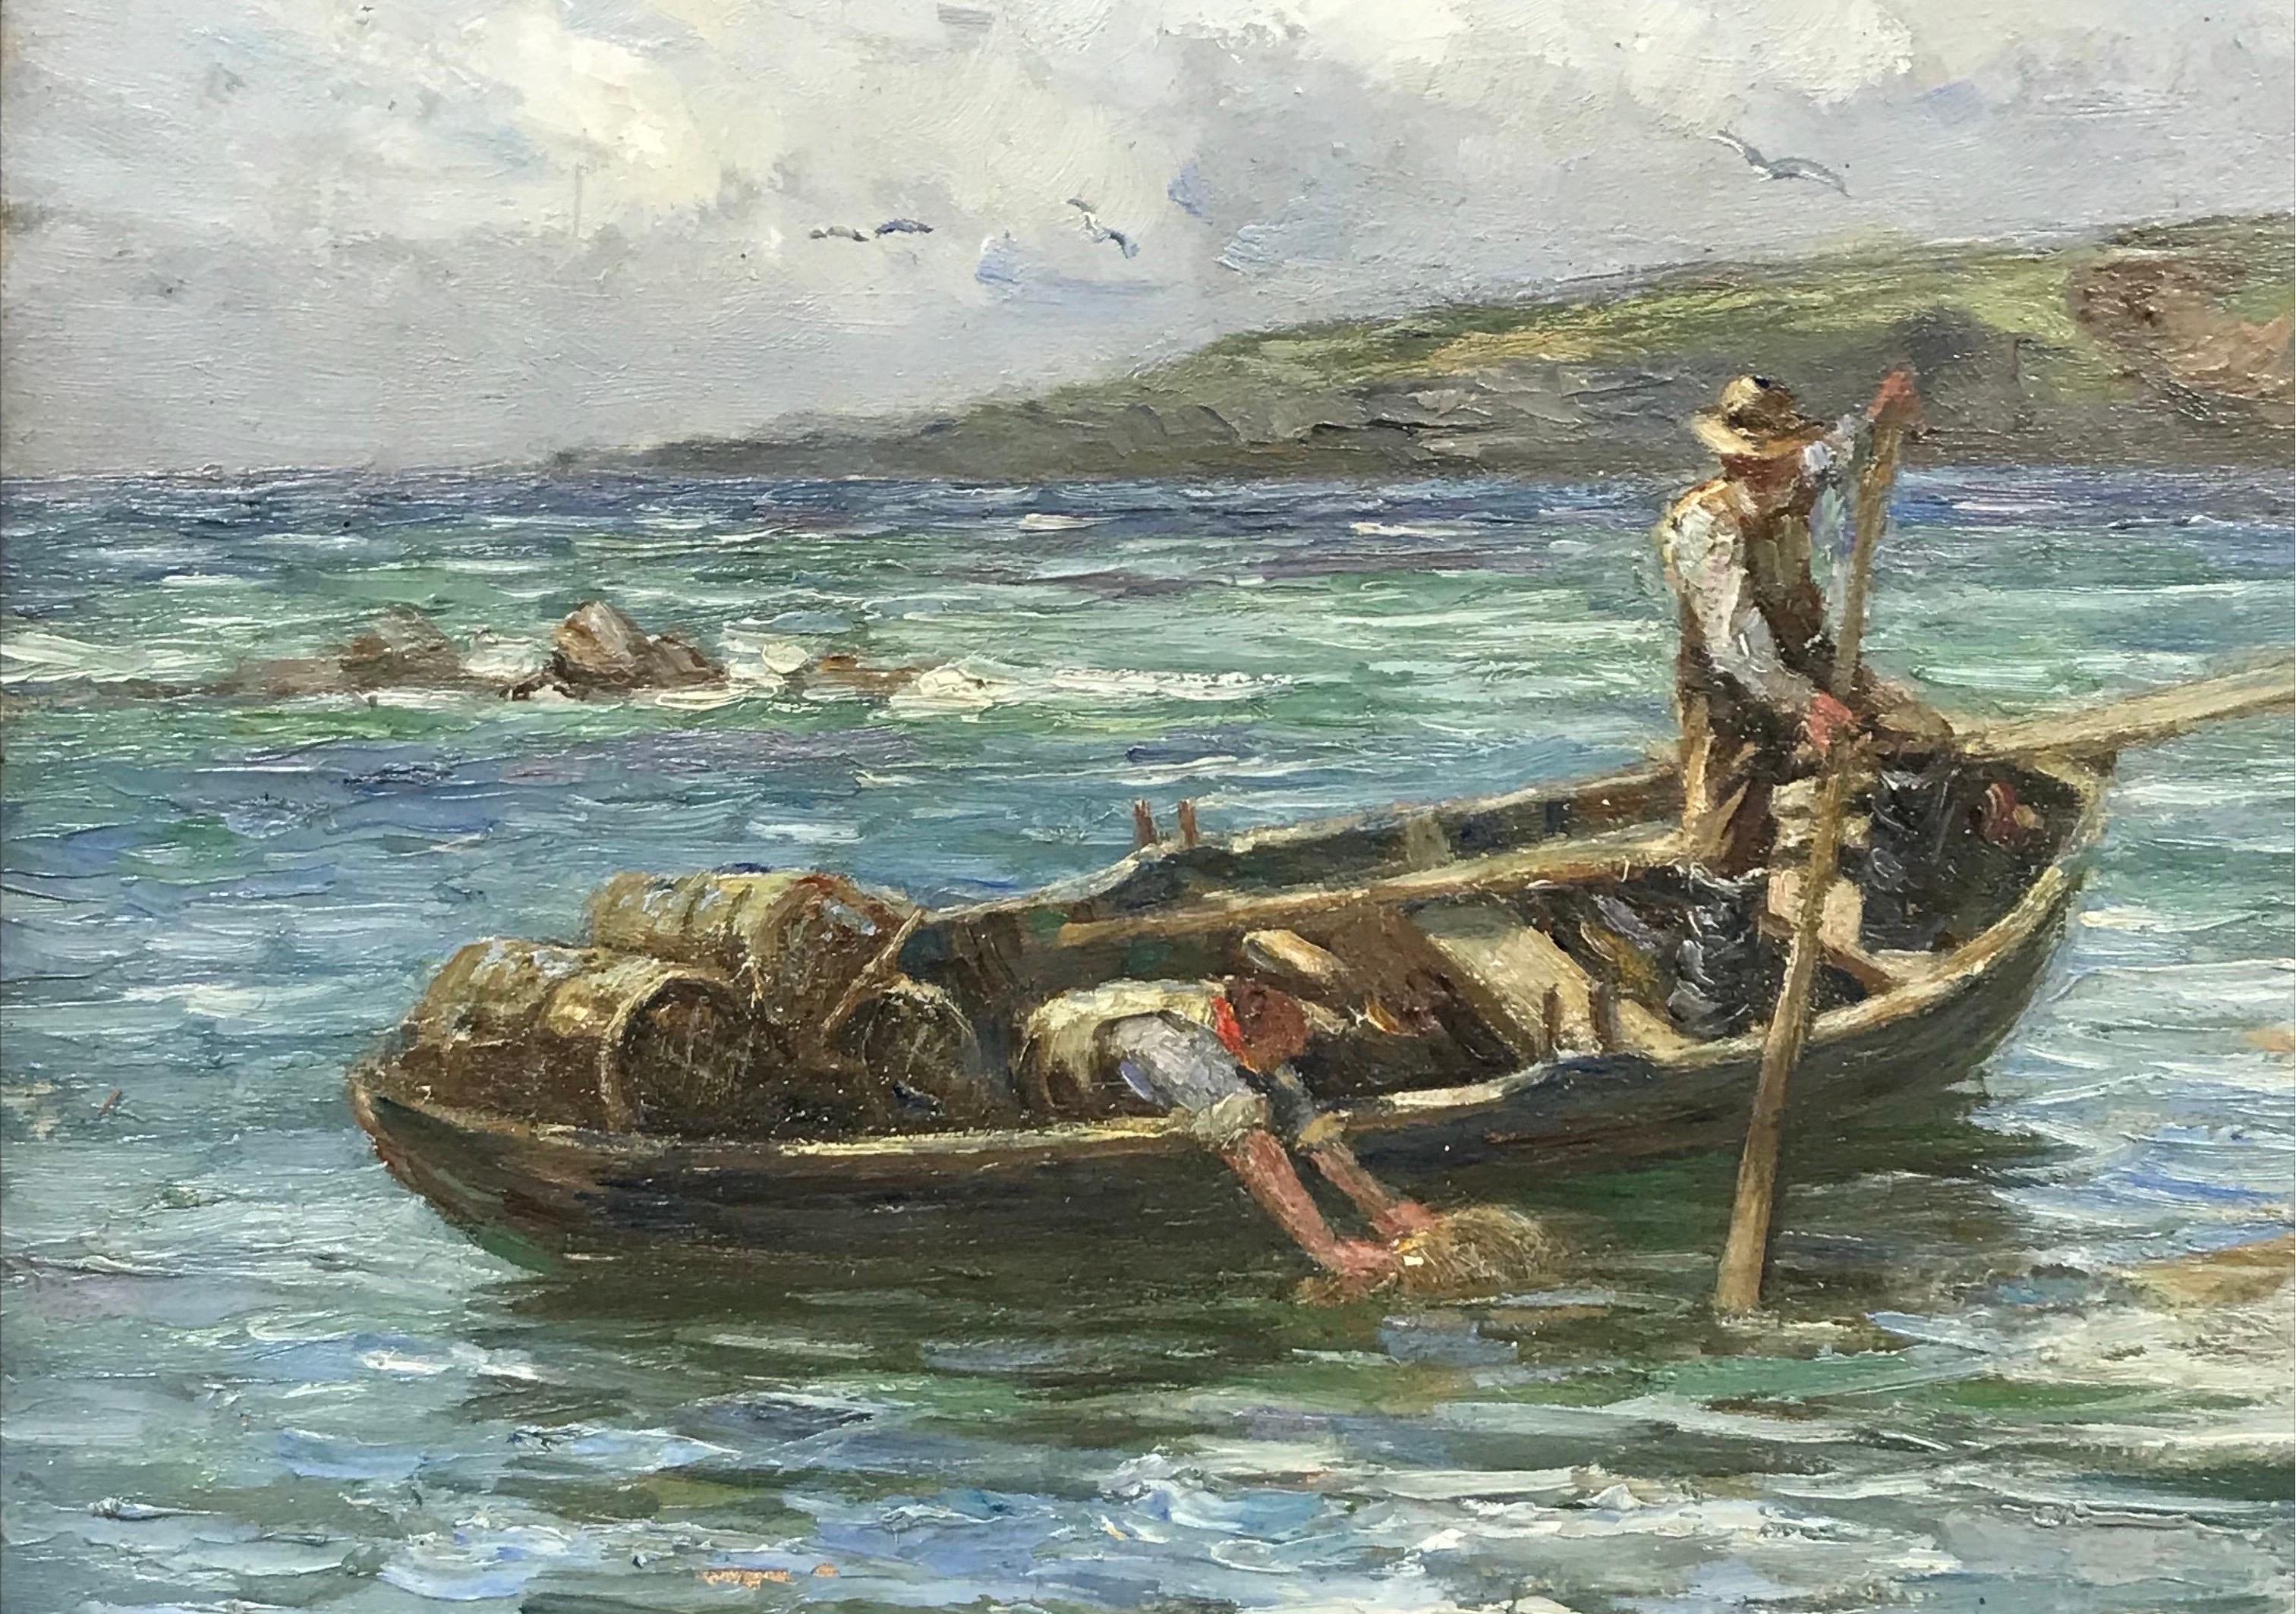 Artist/ School: Scottish School, circa 1920's, illegibly signed and dated

Title: The Lobster Pots

Medium: oil on canvas, framed

Framed: 16.5 x 20.5 inches
Canvas: 12.5 x 16 inches

Provenance: private collection, England

Condition: The painting